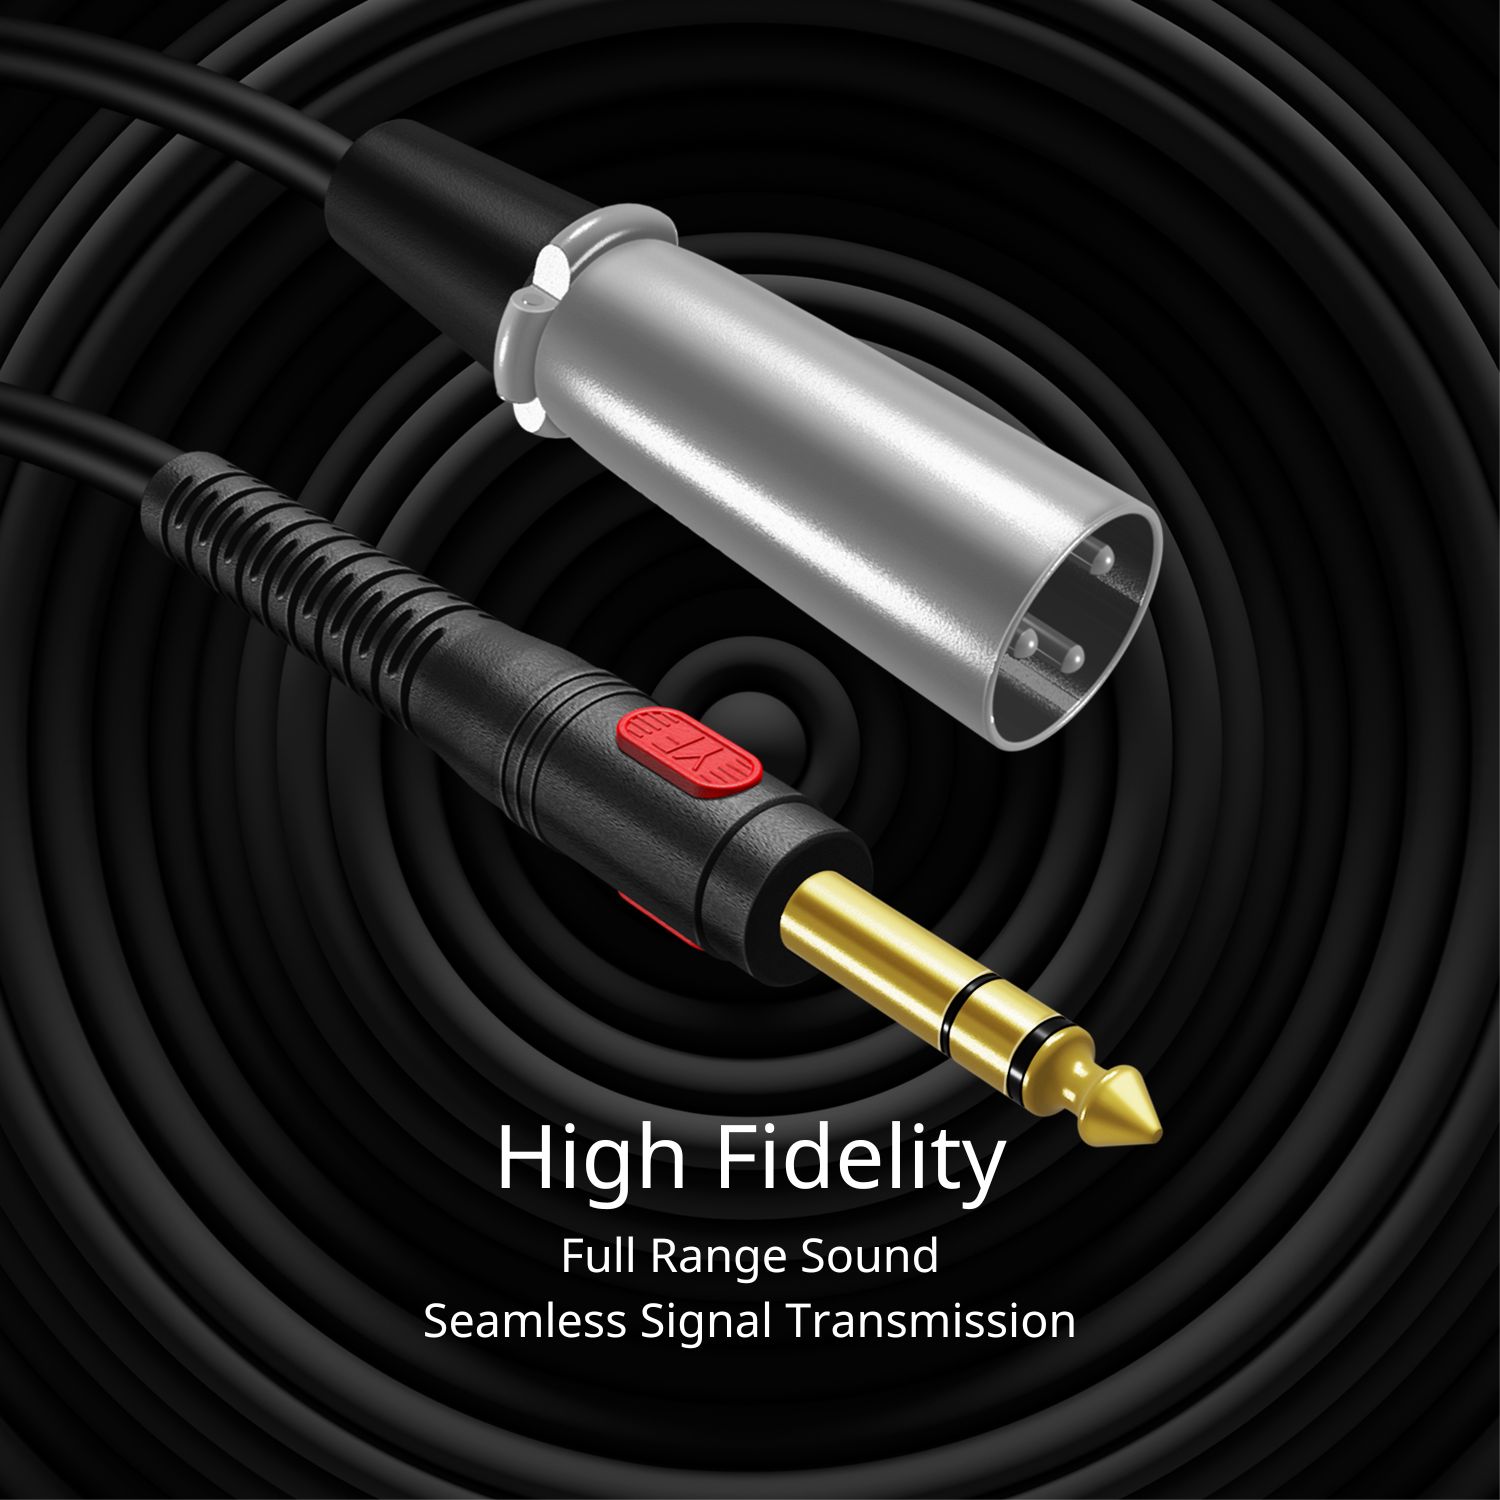 Compatible with equipments with 3-pin XLR connectors such as shotgun microphones, studio harmonizers, mixing boards, patch bays, preamps, speaker systems, and stage lighting